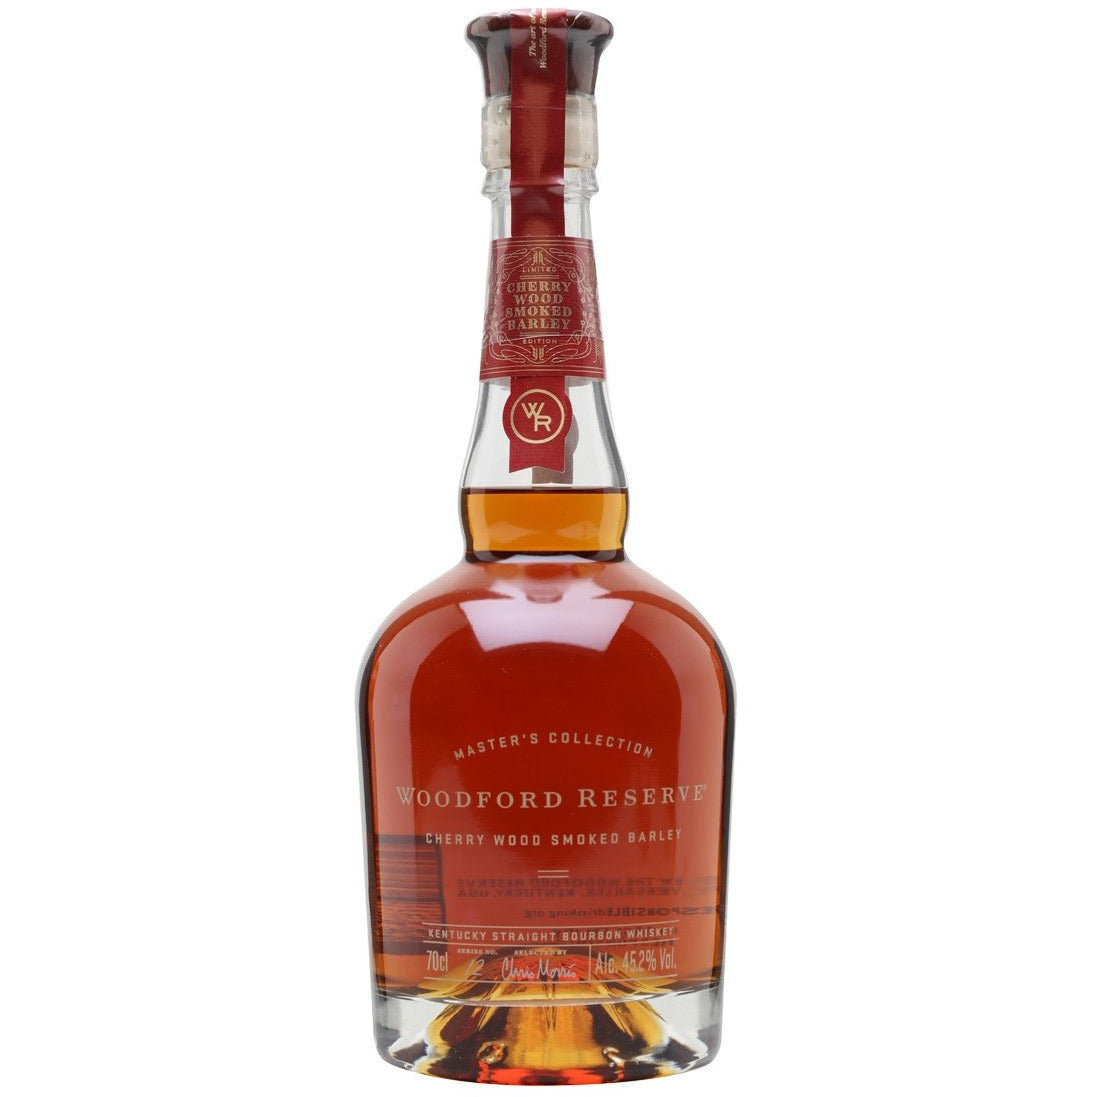 Woodford Reserve Woodford Reserve Master's Collection Cherry Wood Smoked Barley Whiskey